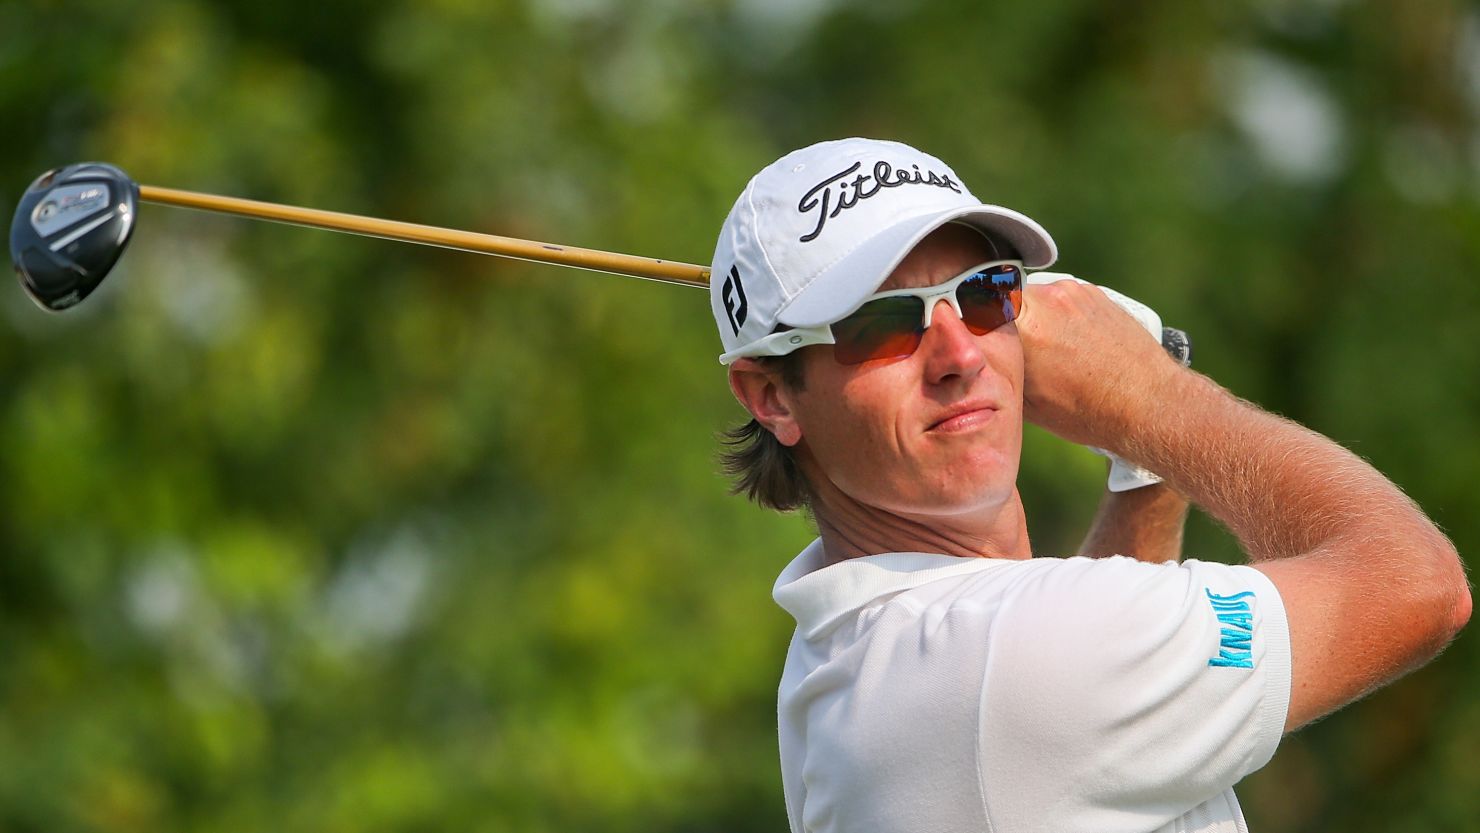 Nicolas Colsaerts showed his power by producing an astonishing drive on the third hole in Durban.